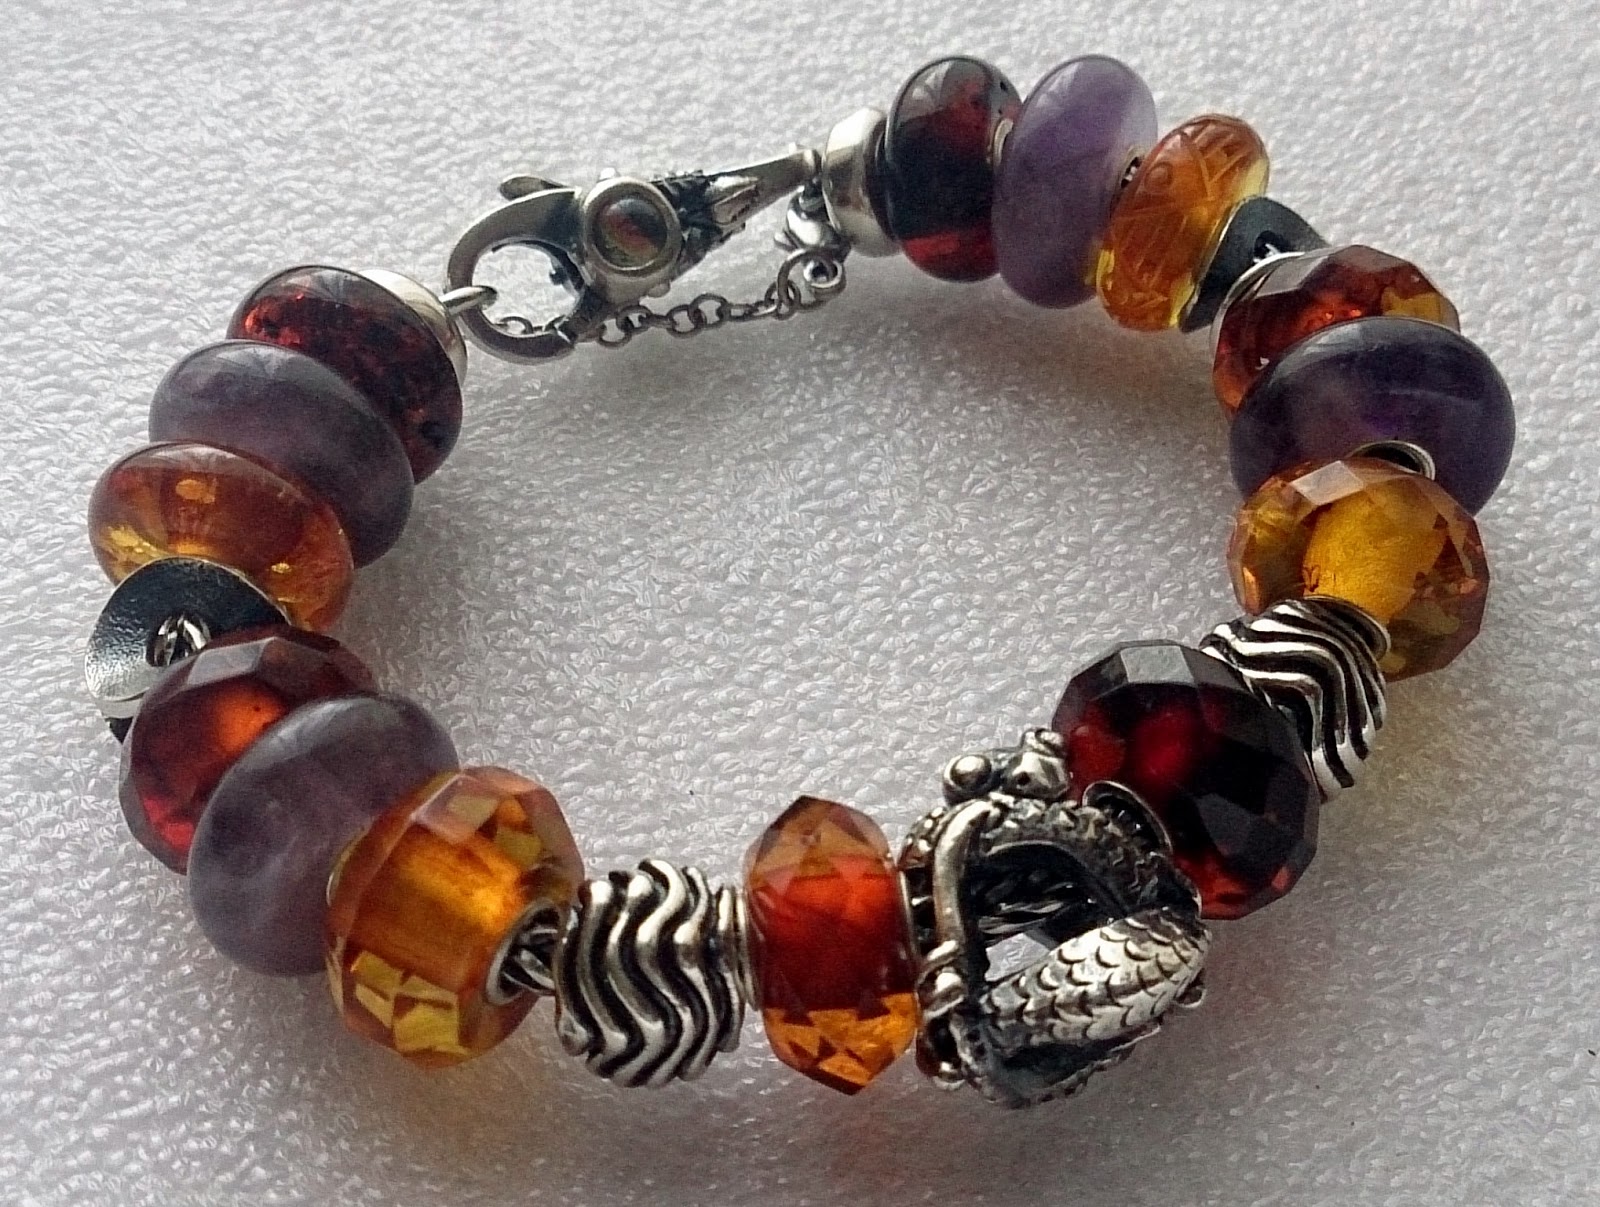 Curling Stones for Lego People: Trollbeads Amber and Amethyst Bracelet